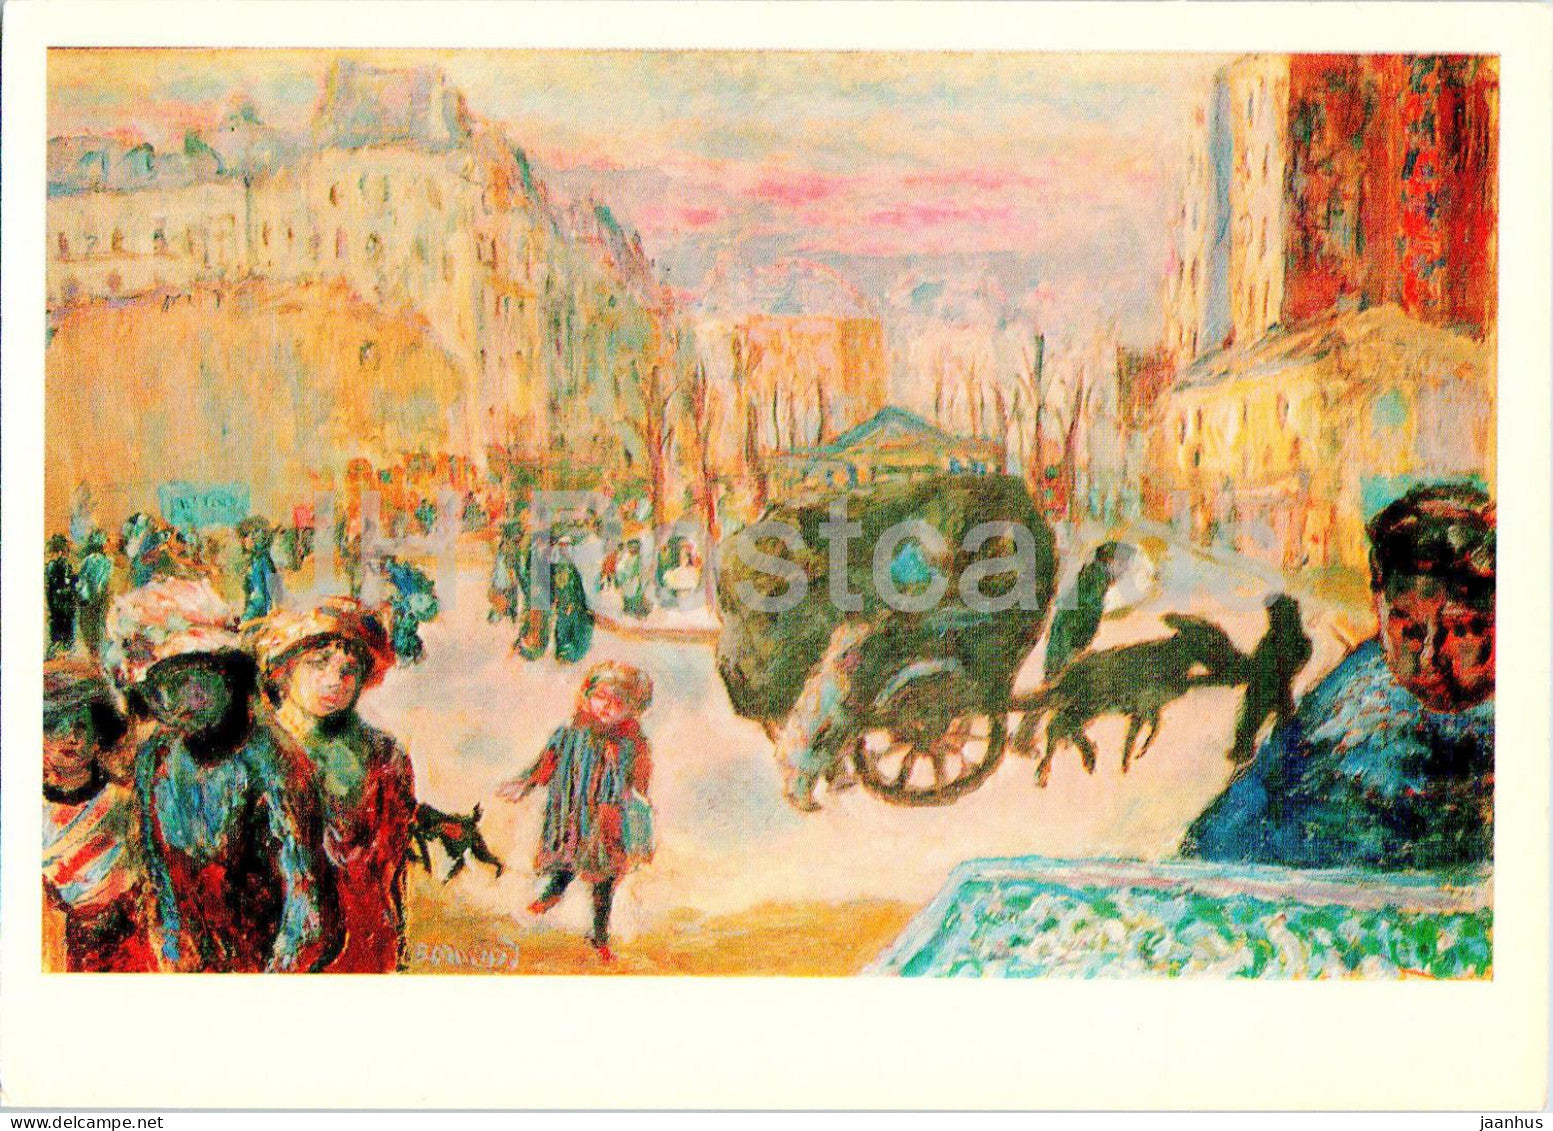 painting by Pierre Bonnard - Morning in Paris - French art - 1977 - Russia USSR - unused - JH Postcards